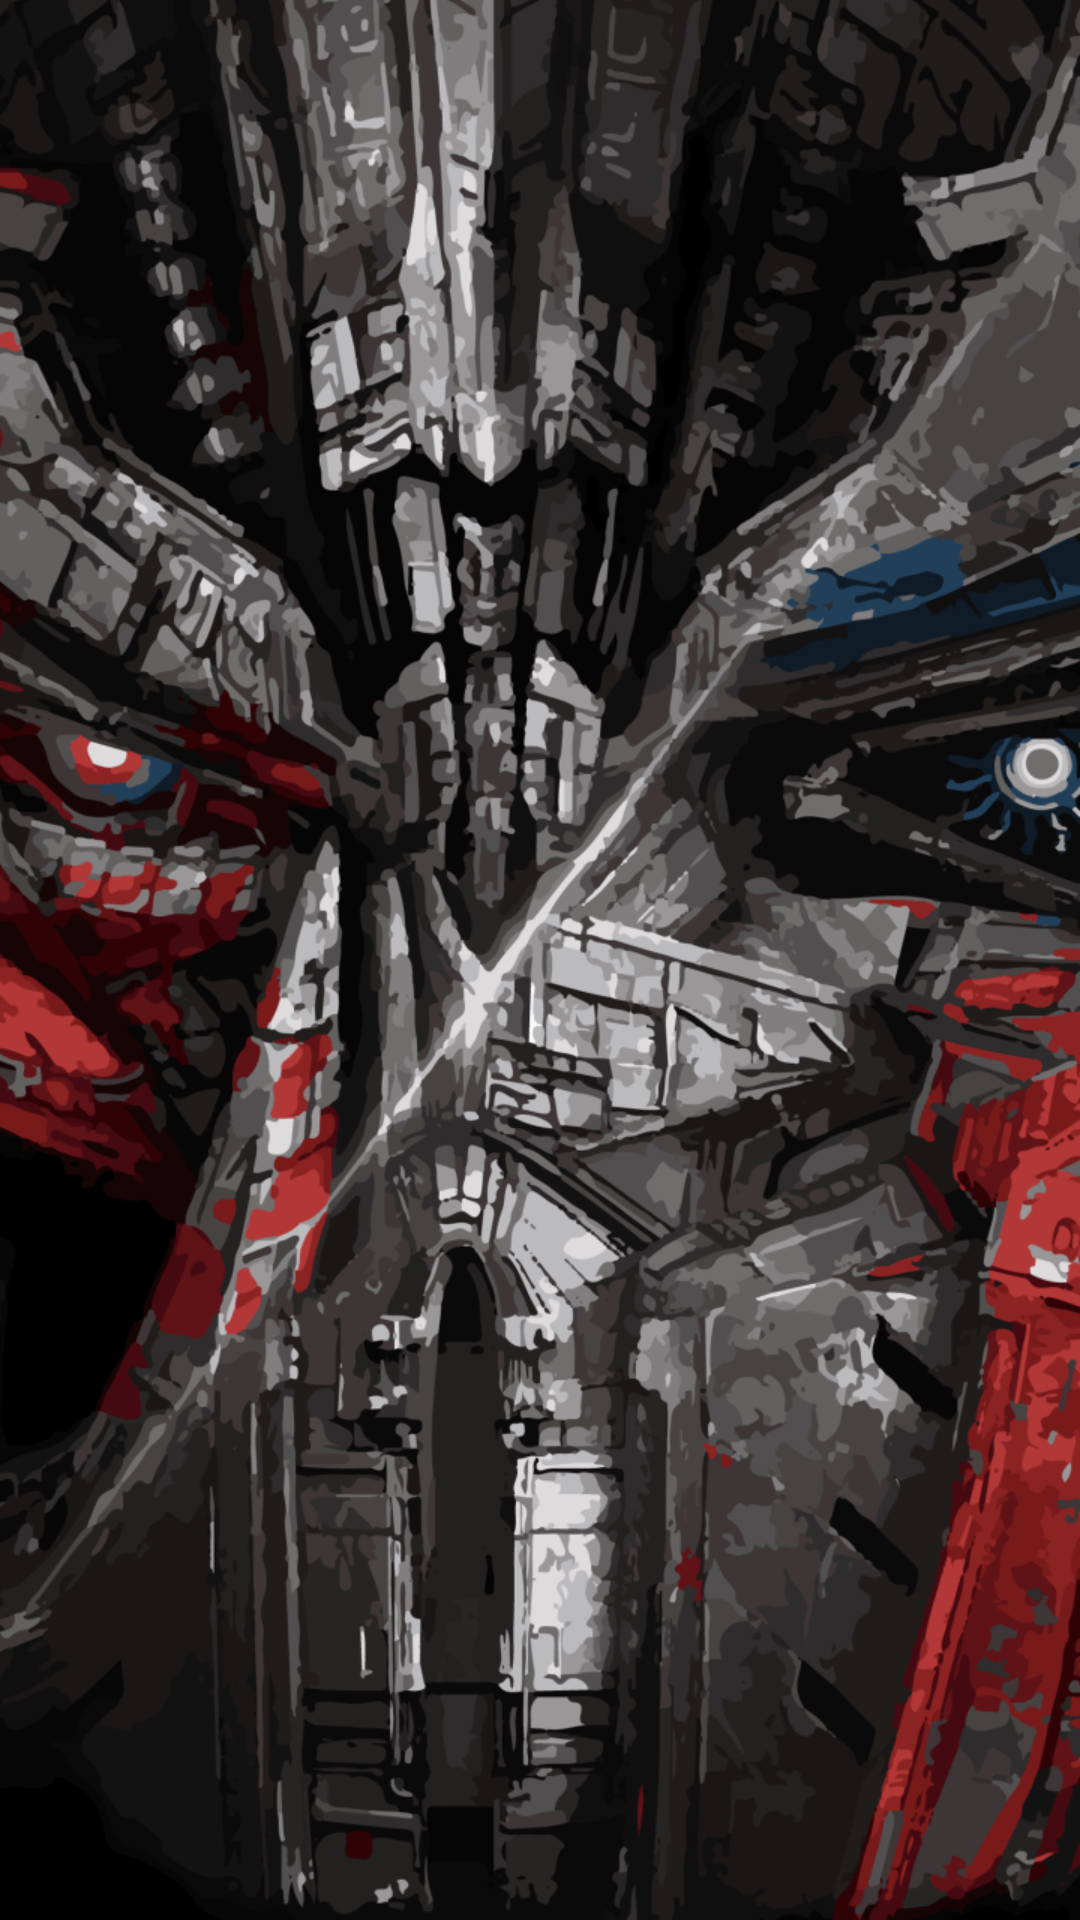 1080x1920 Transformers Wallpapers Top 30 Best Transformers Backgrounds Download